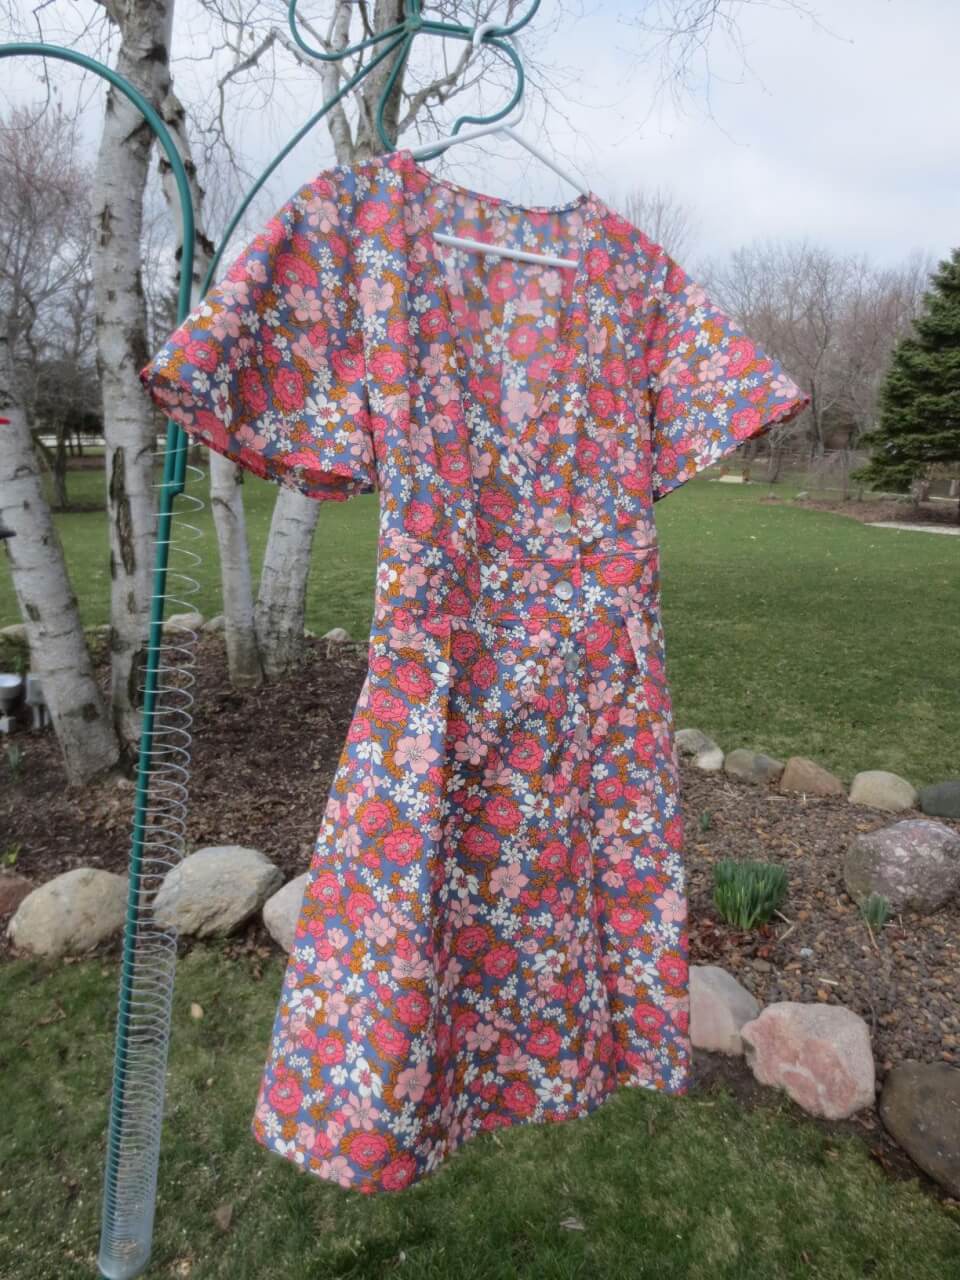 Lawn Dress & Fabric - how nice it is for spring! - Bungalow Quilting & Yarn